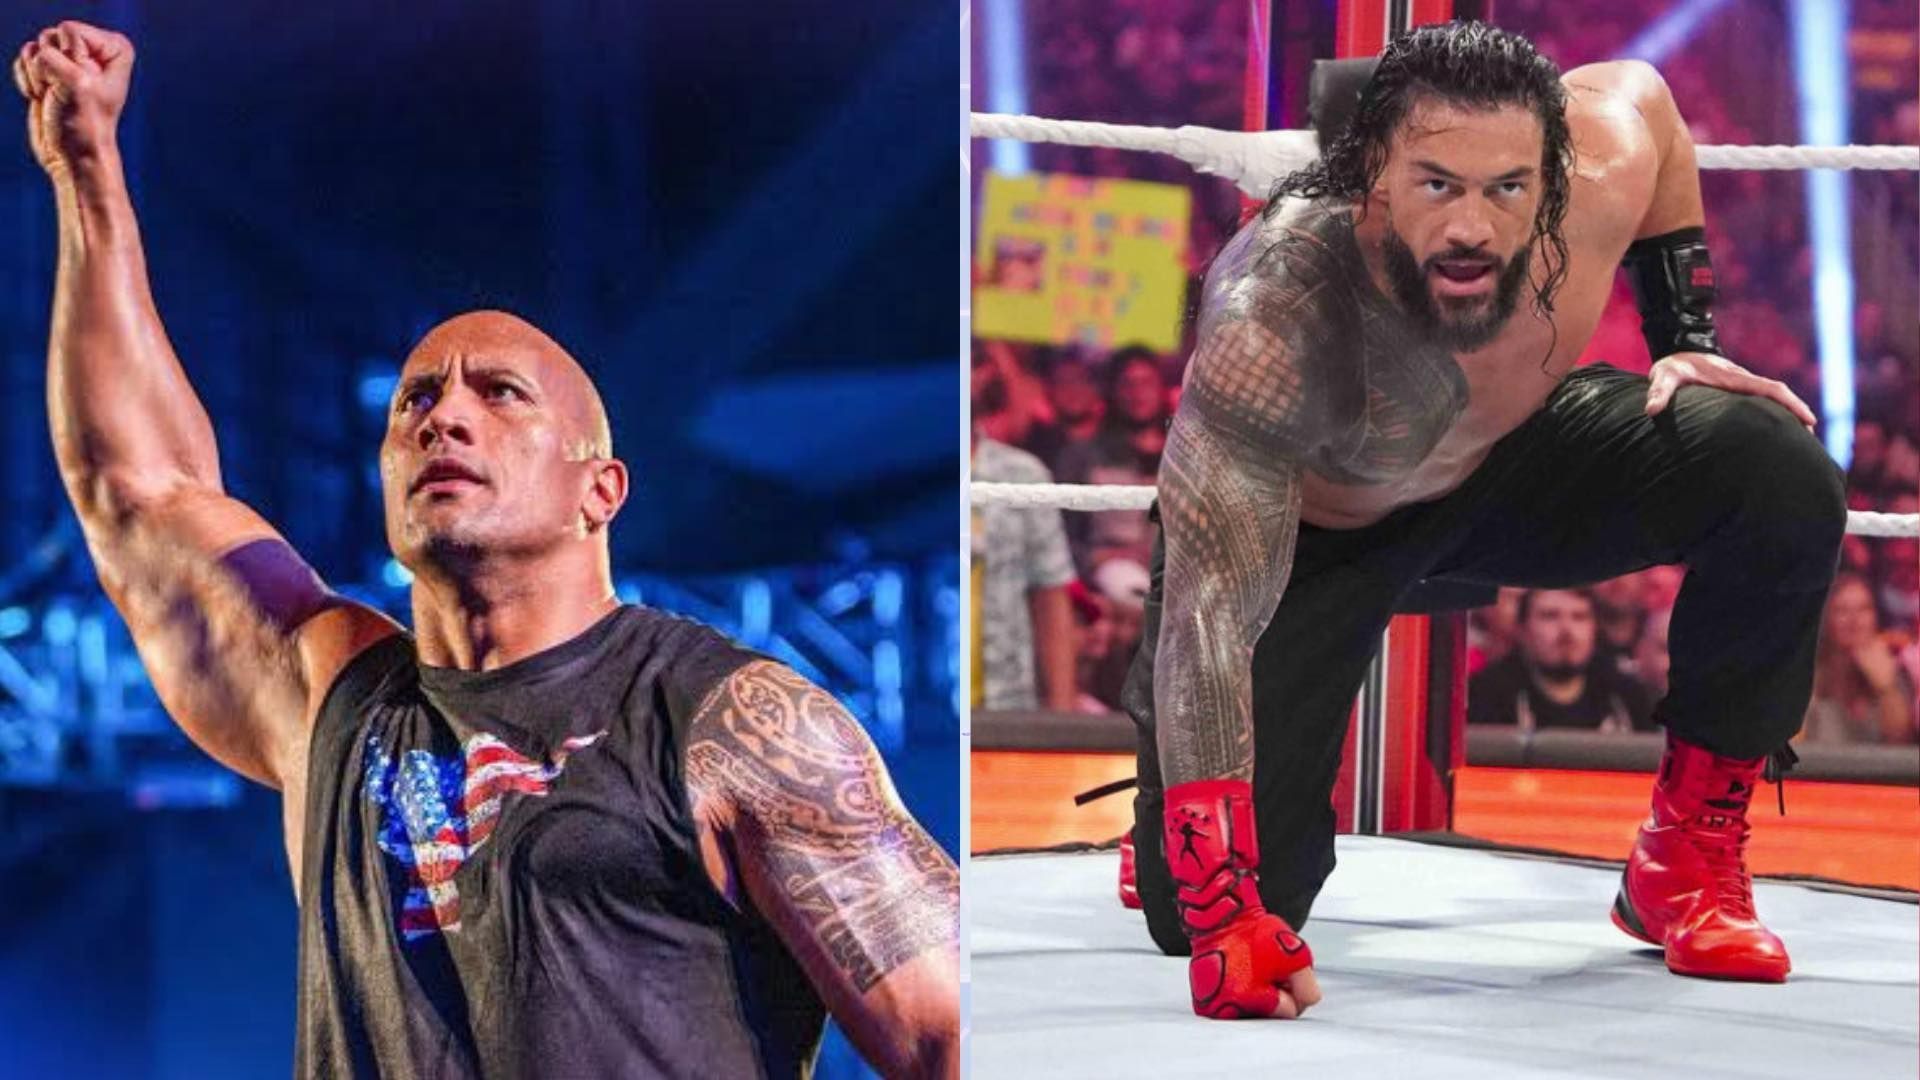 The Rock and Roman Reigns are set for another face off at WrestleMania 40 Kickoff Press event.